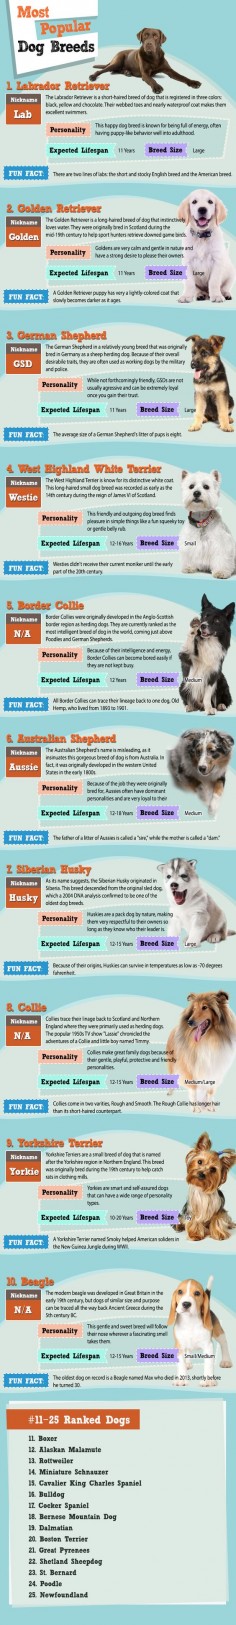 The Most Popular #Dog Breeds of 2015 - In January and February we polled people from around the world, asking them to vote for their favorite dog breed. After collecting more than 17,500 votes, the top dog breeds of 2015 have been revealed!  Did your favorite breeds make it into the top? Are you surprised by a certain breed that made the cut? Tell us in the comments! #infographic